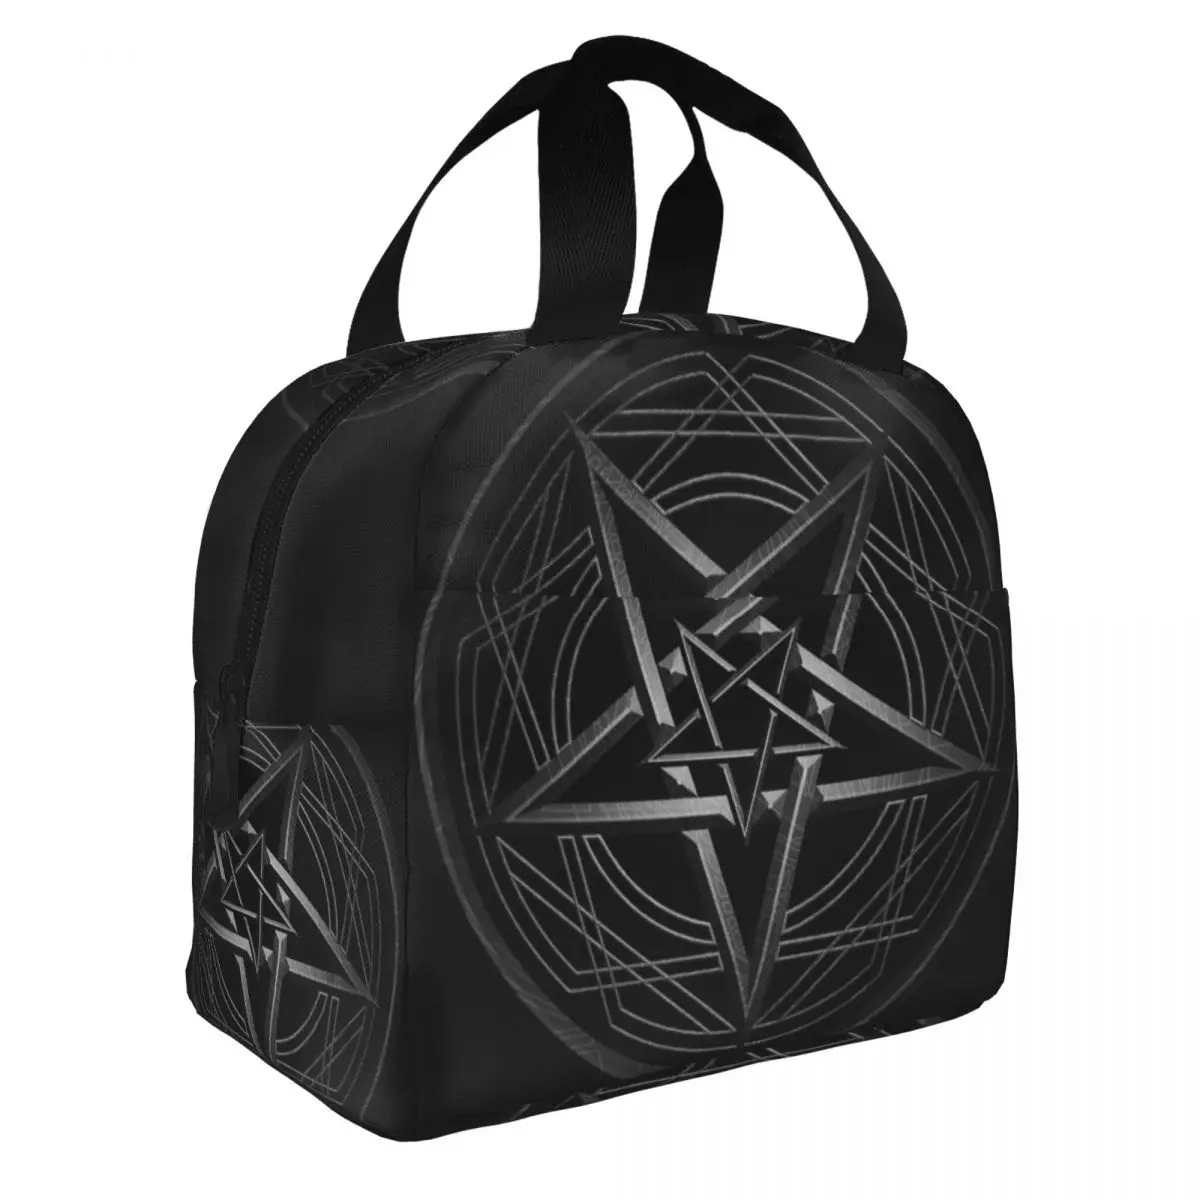 Gothic Pentagram Lunch Bento Bags Portable Aluminum Foil thickened Thermal Cloth Lunch Bag for Women Men Boy